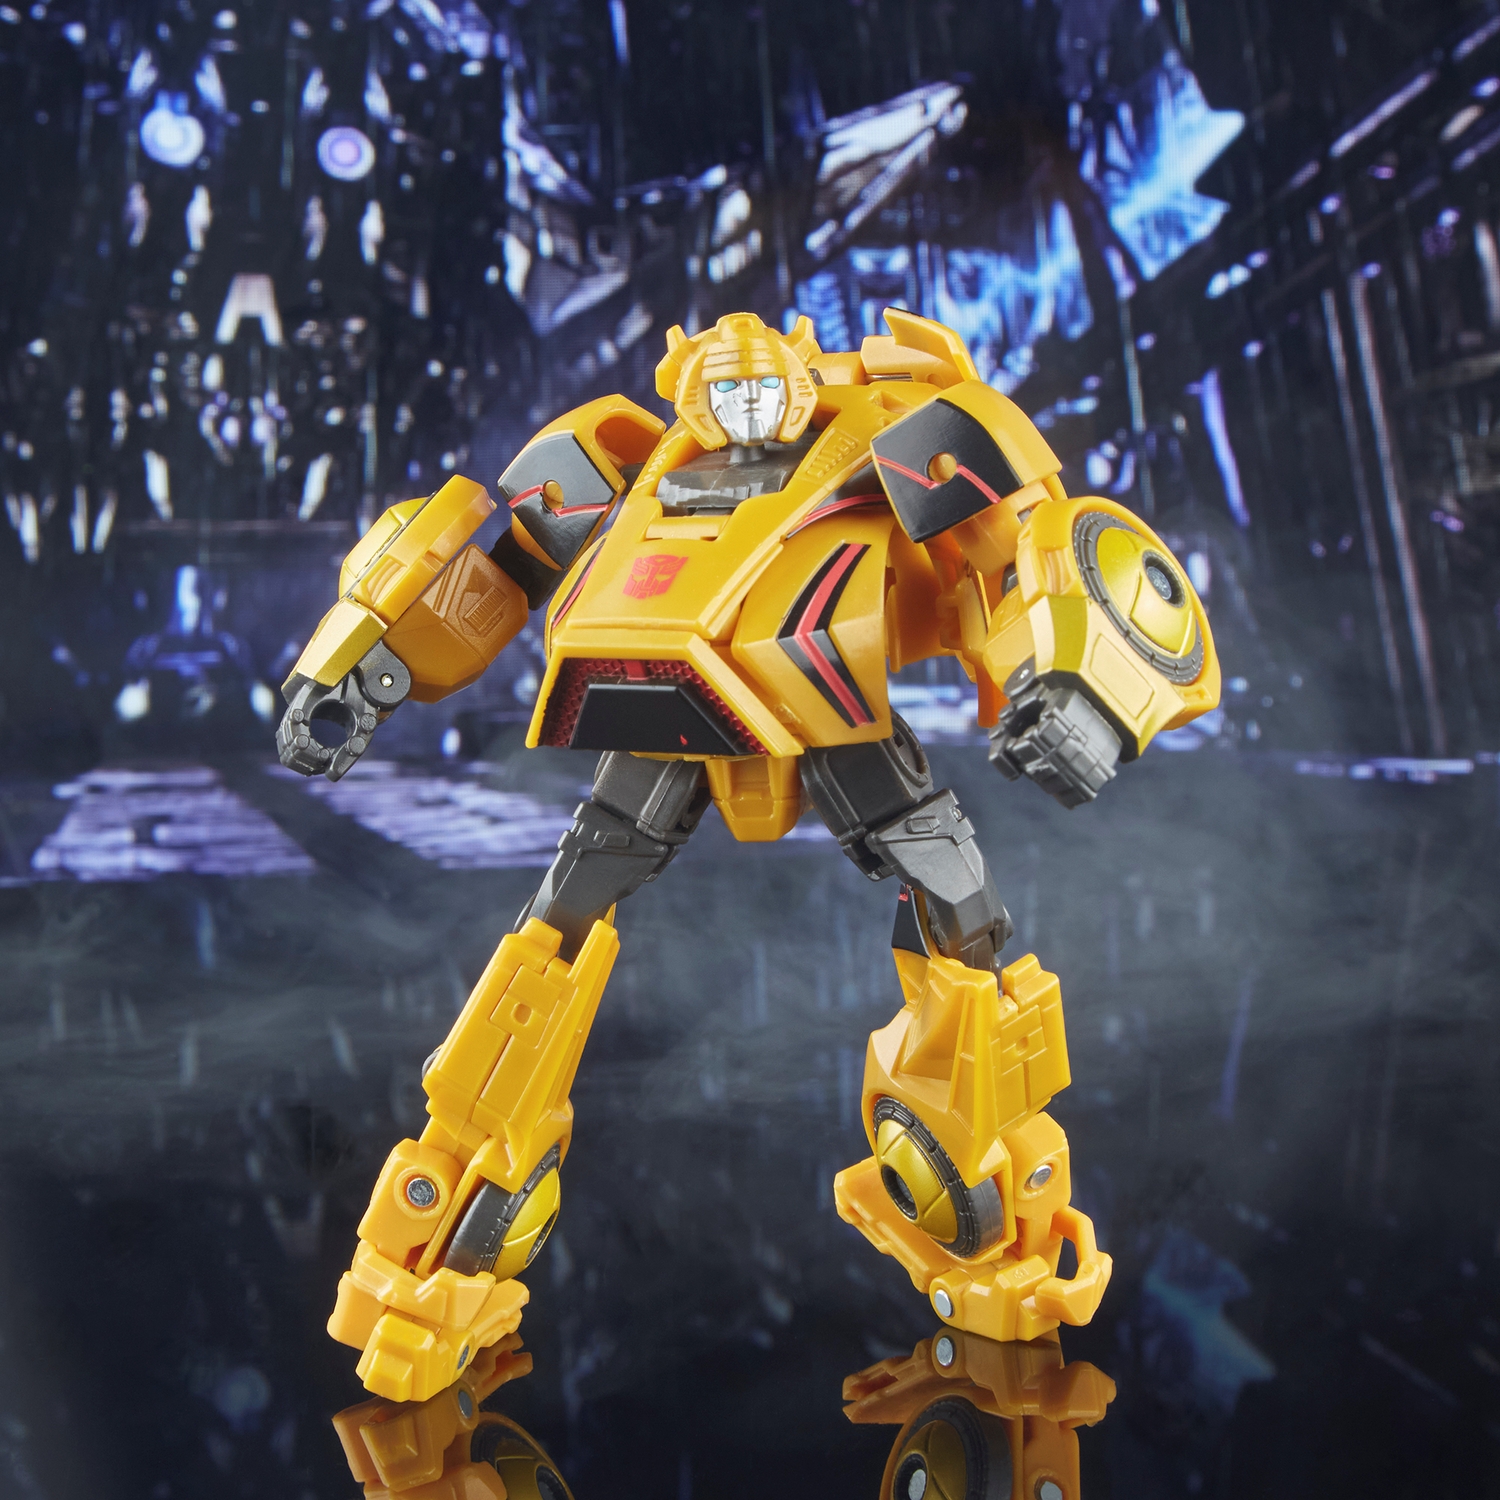 F7235_DIO_TRA_SS_GAMEREDITION_BUMBLEBEE_0001_2000 - Copy.jpg